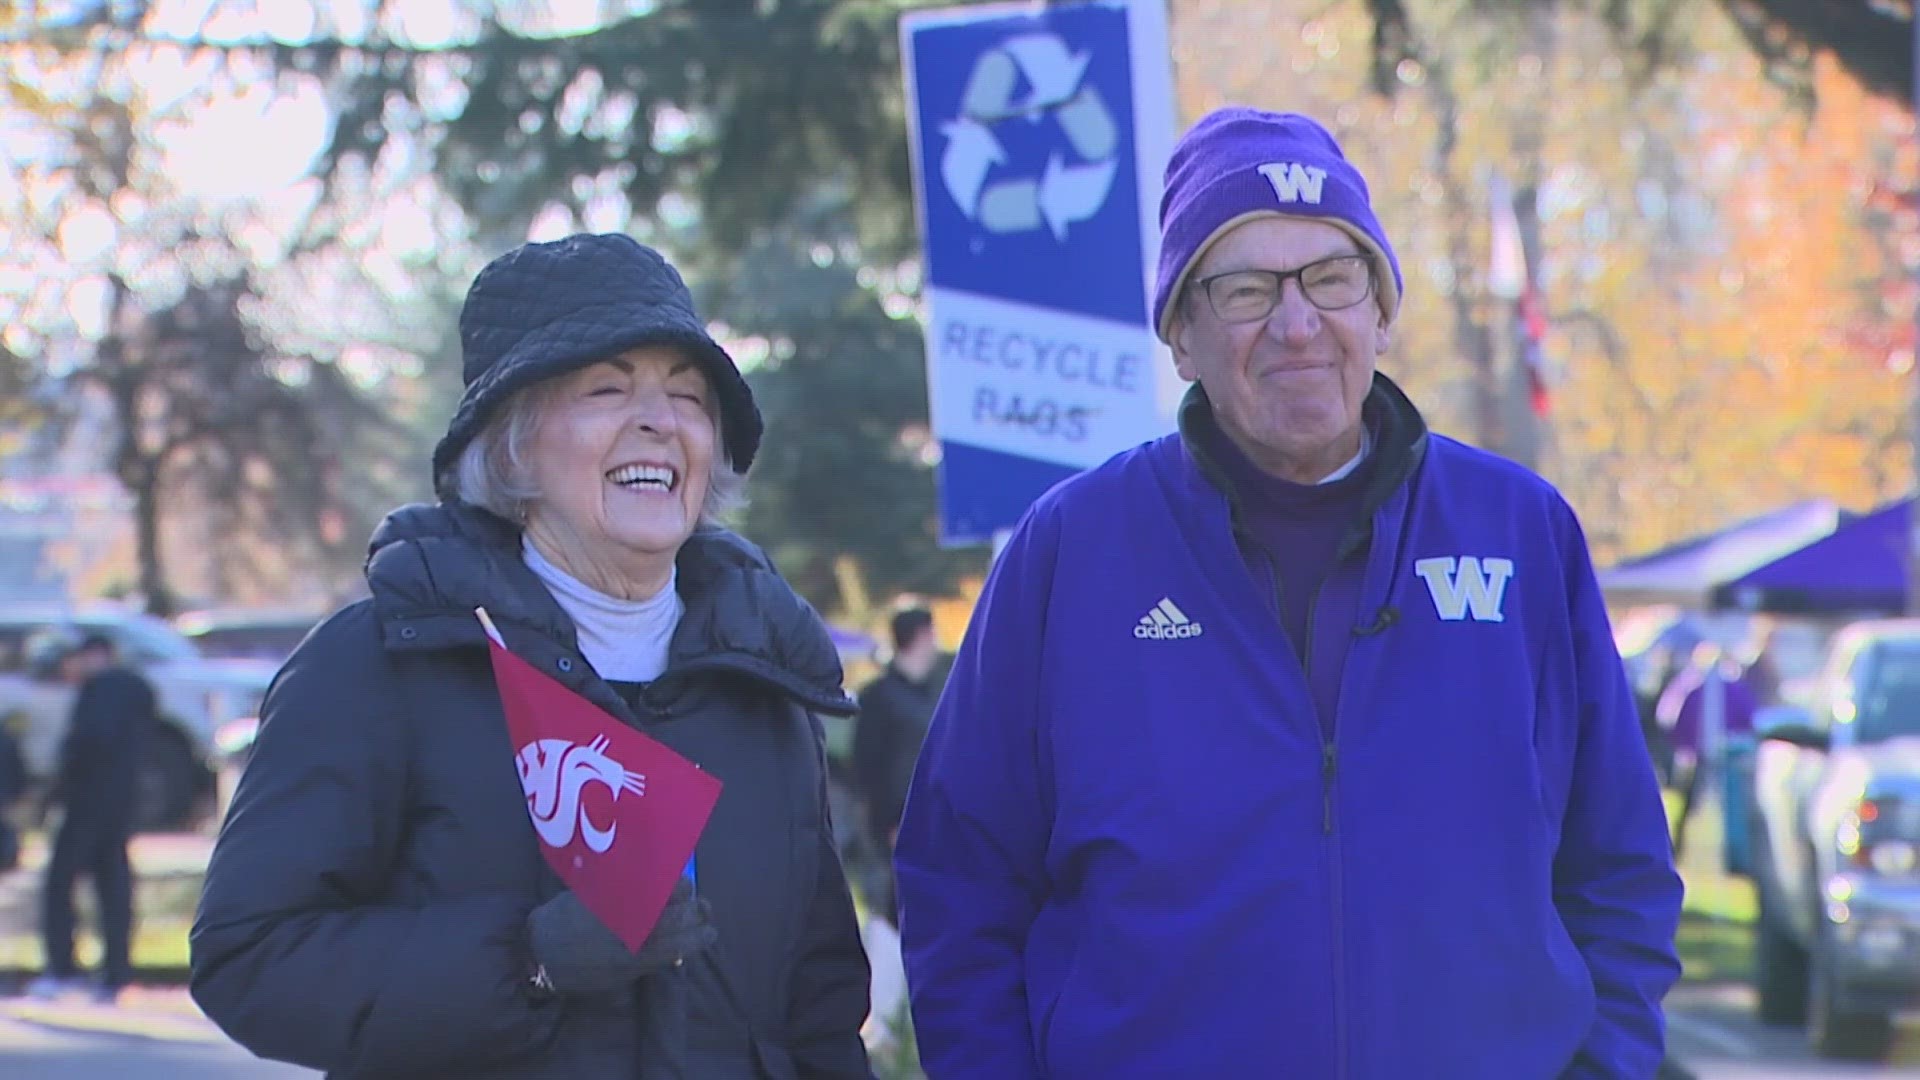 This year marked the 115th standoff between the University of Washington Huskies and the Washington State Cougars.